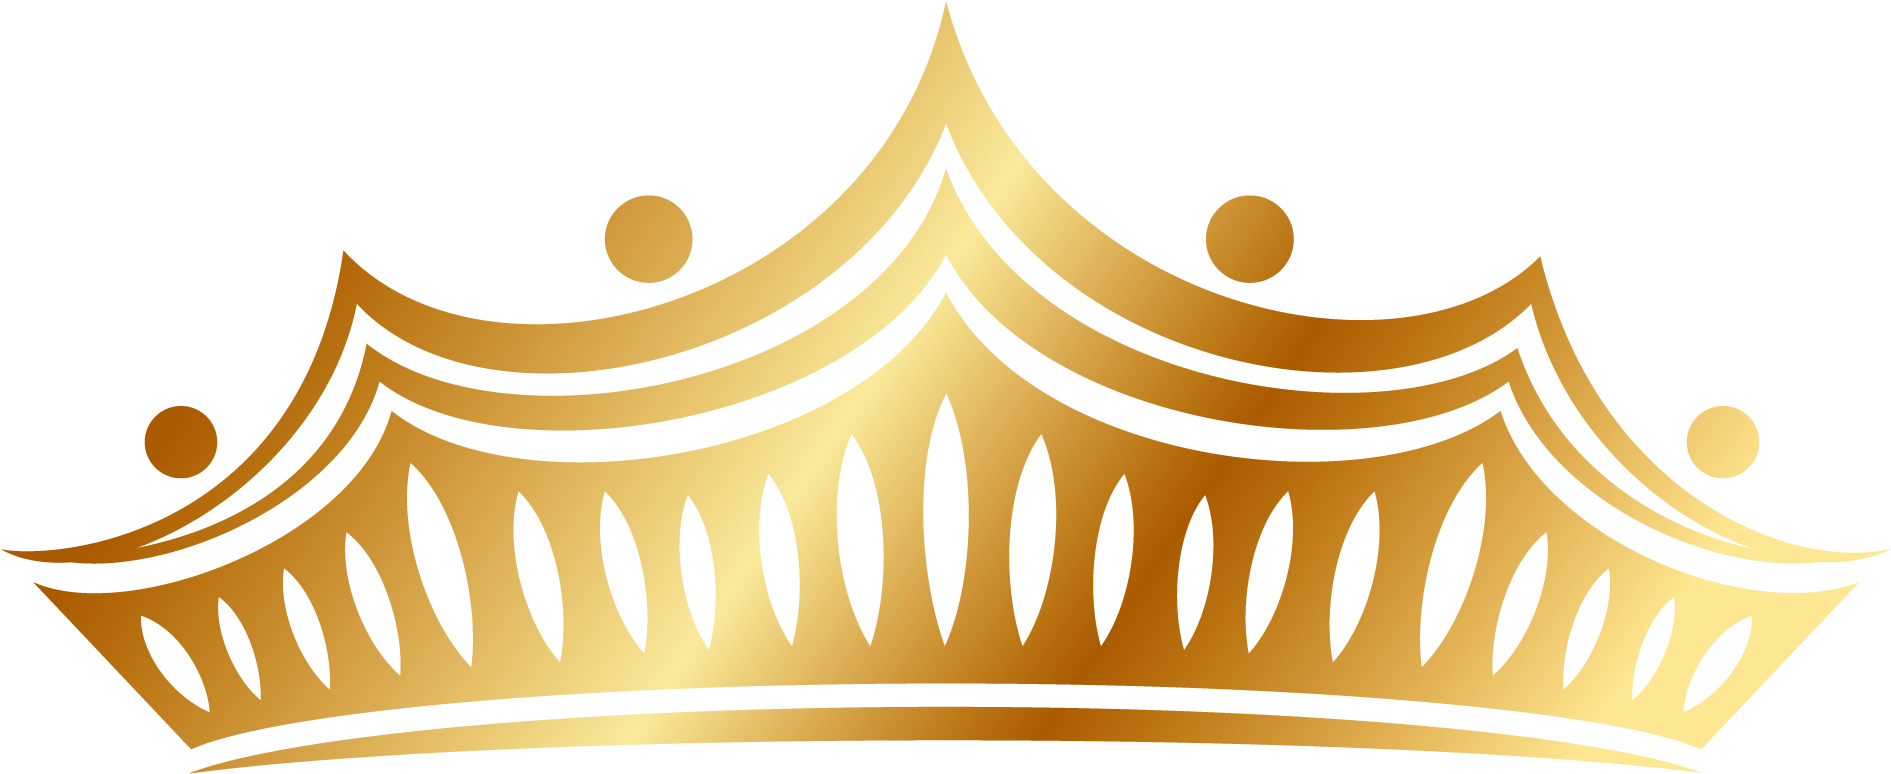 Clash Royale Icon - Golden Crown Vector Png (2126x2126)